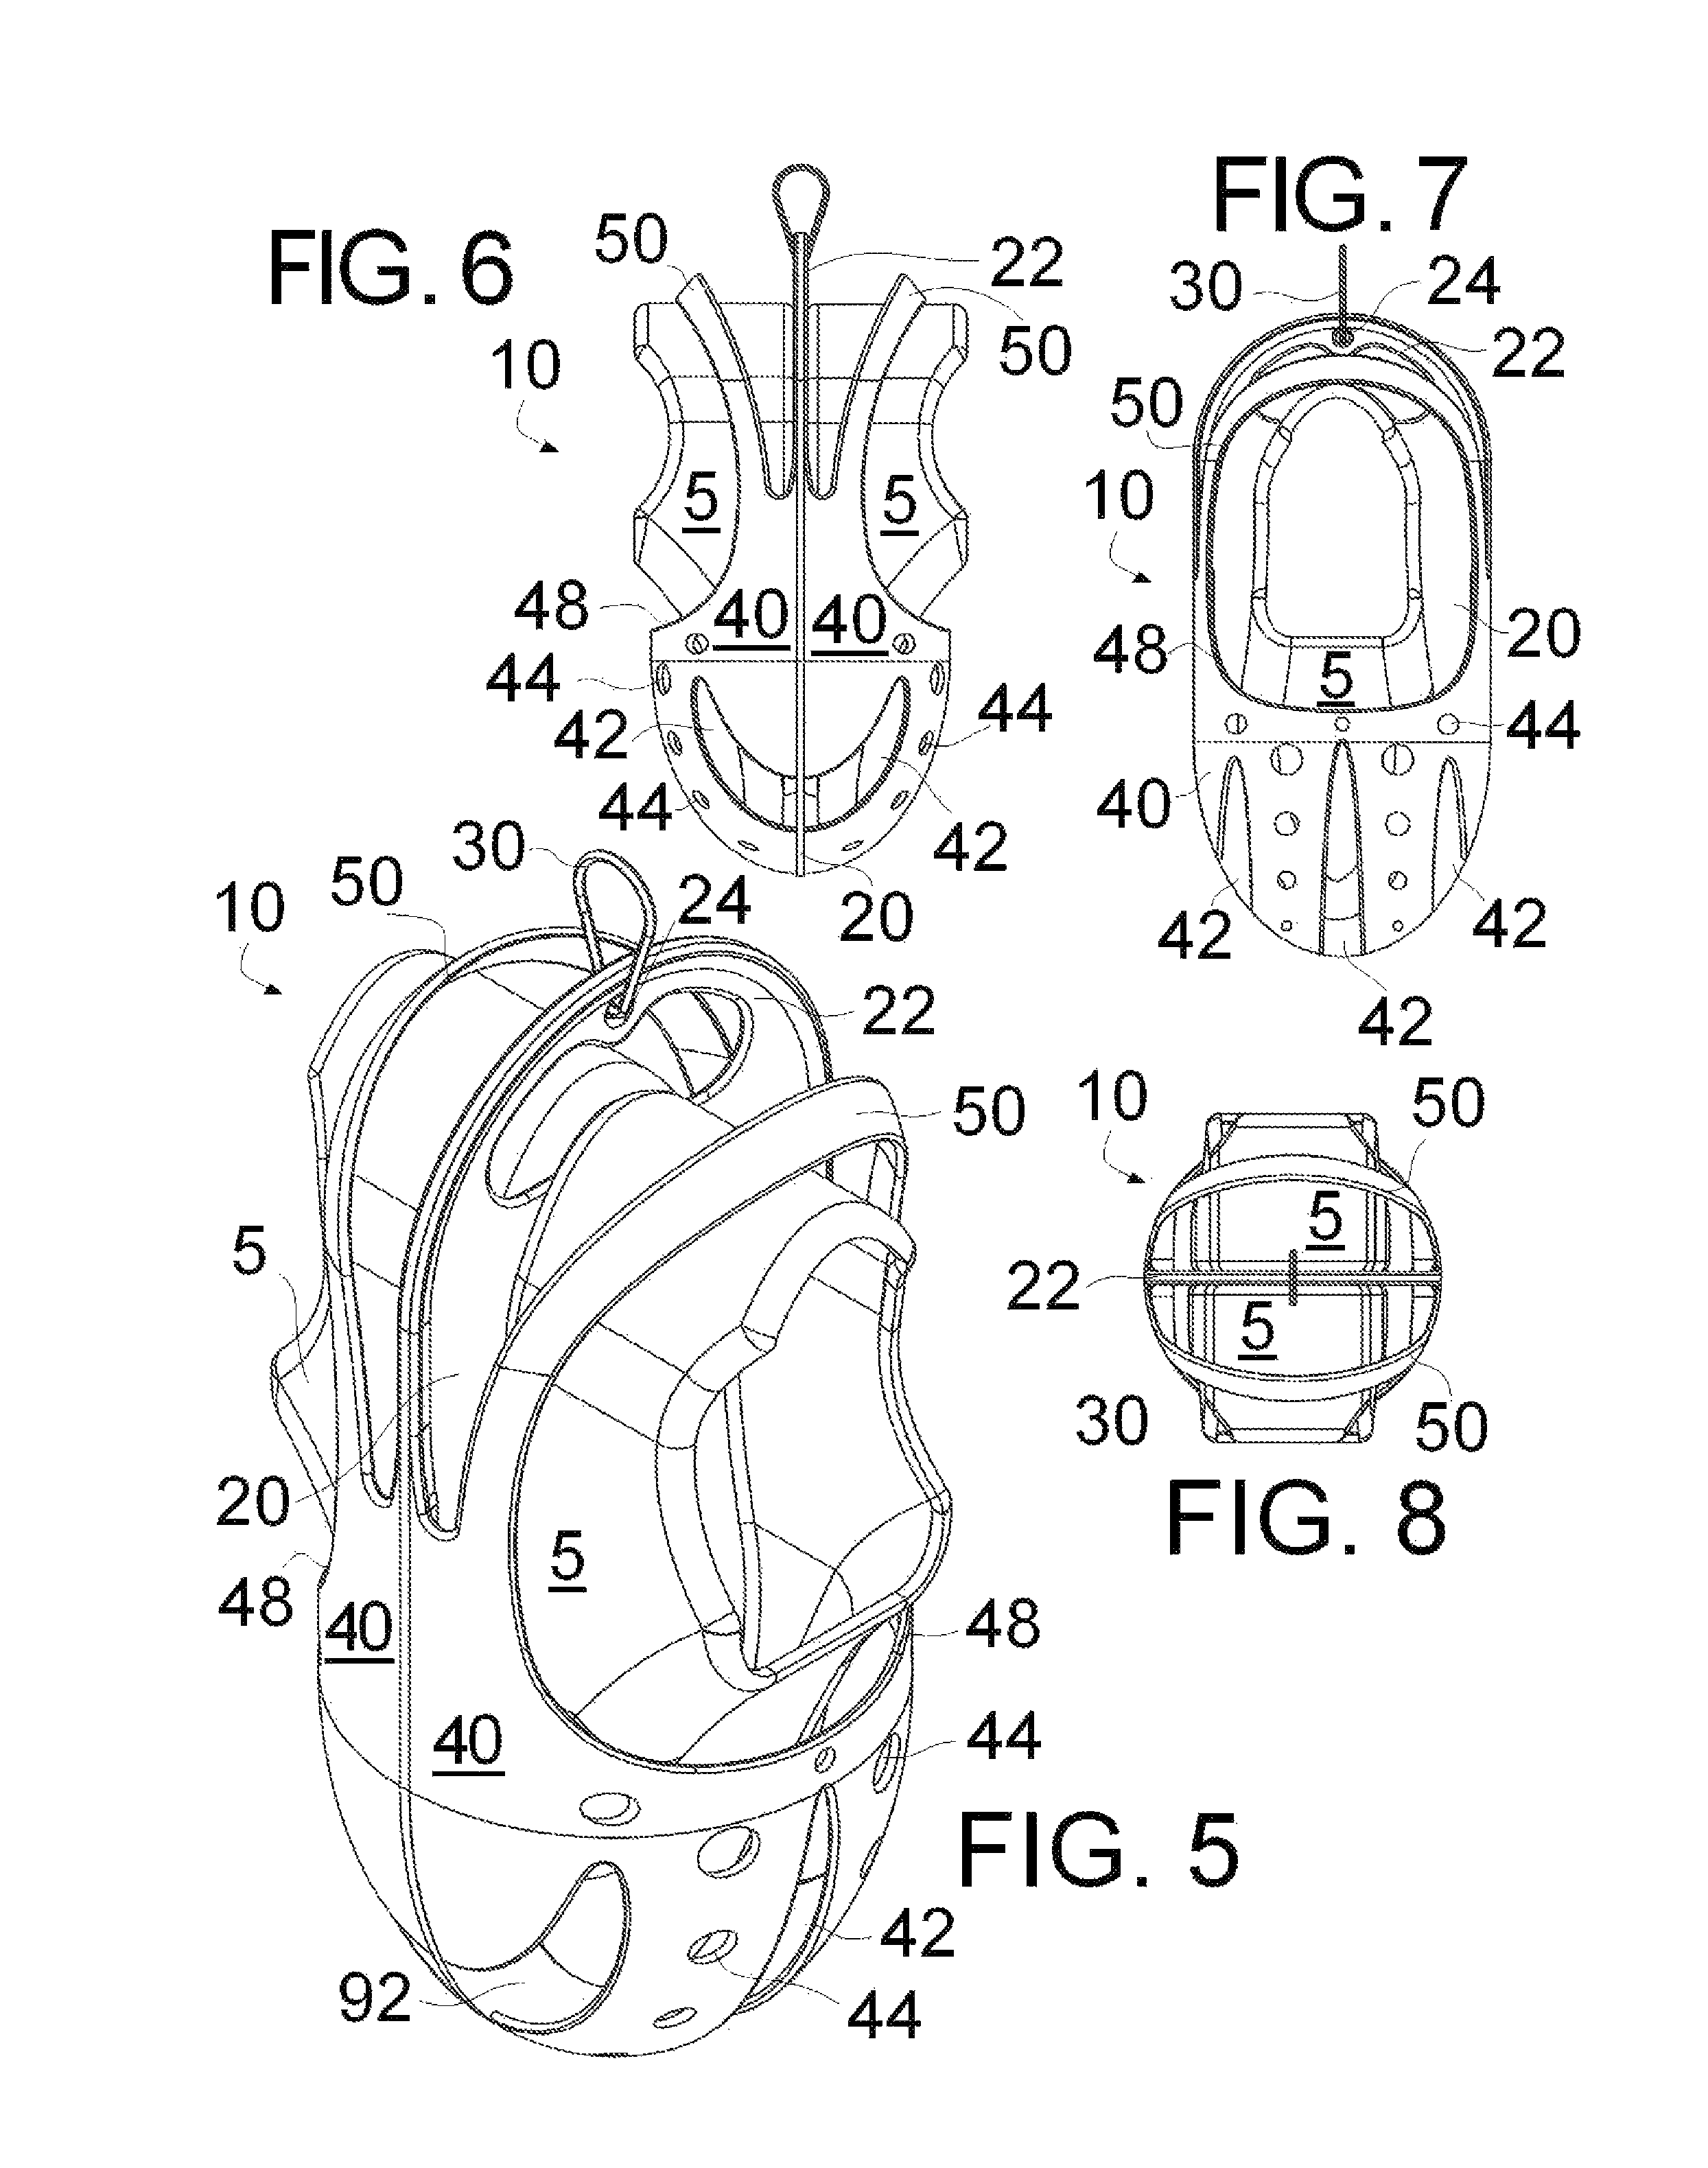 Footwear carrier: shoe holding support structure